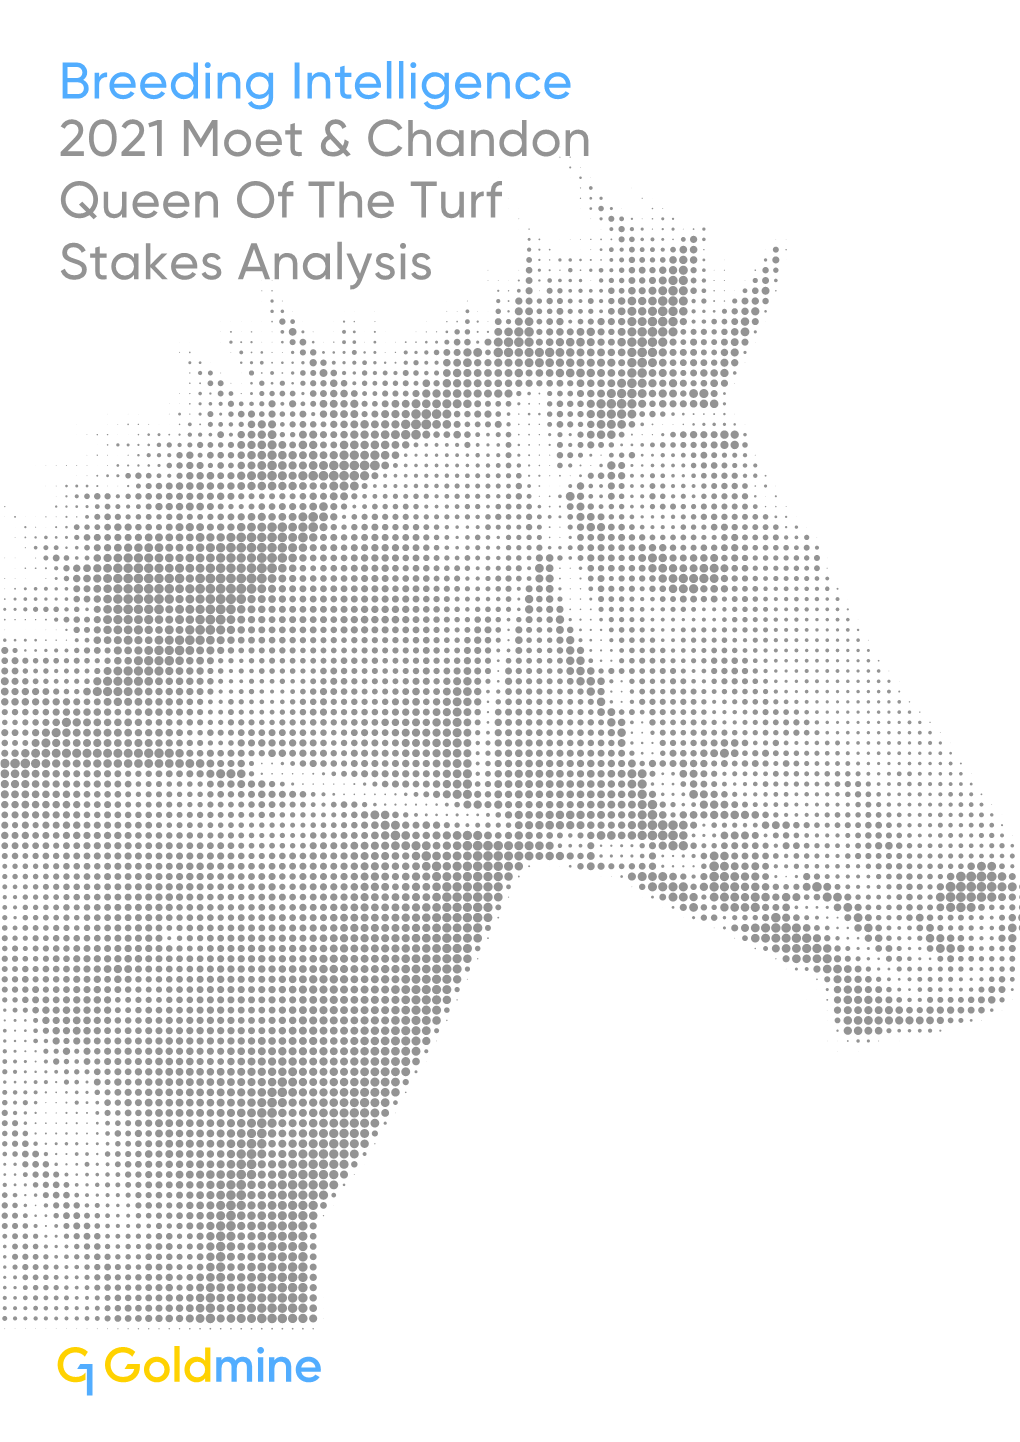 Breeding Intelligence 2021 Moet & Chandon Queen of the Turf Stakes Analysis